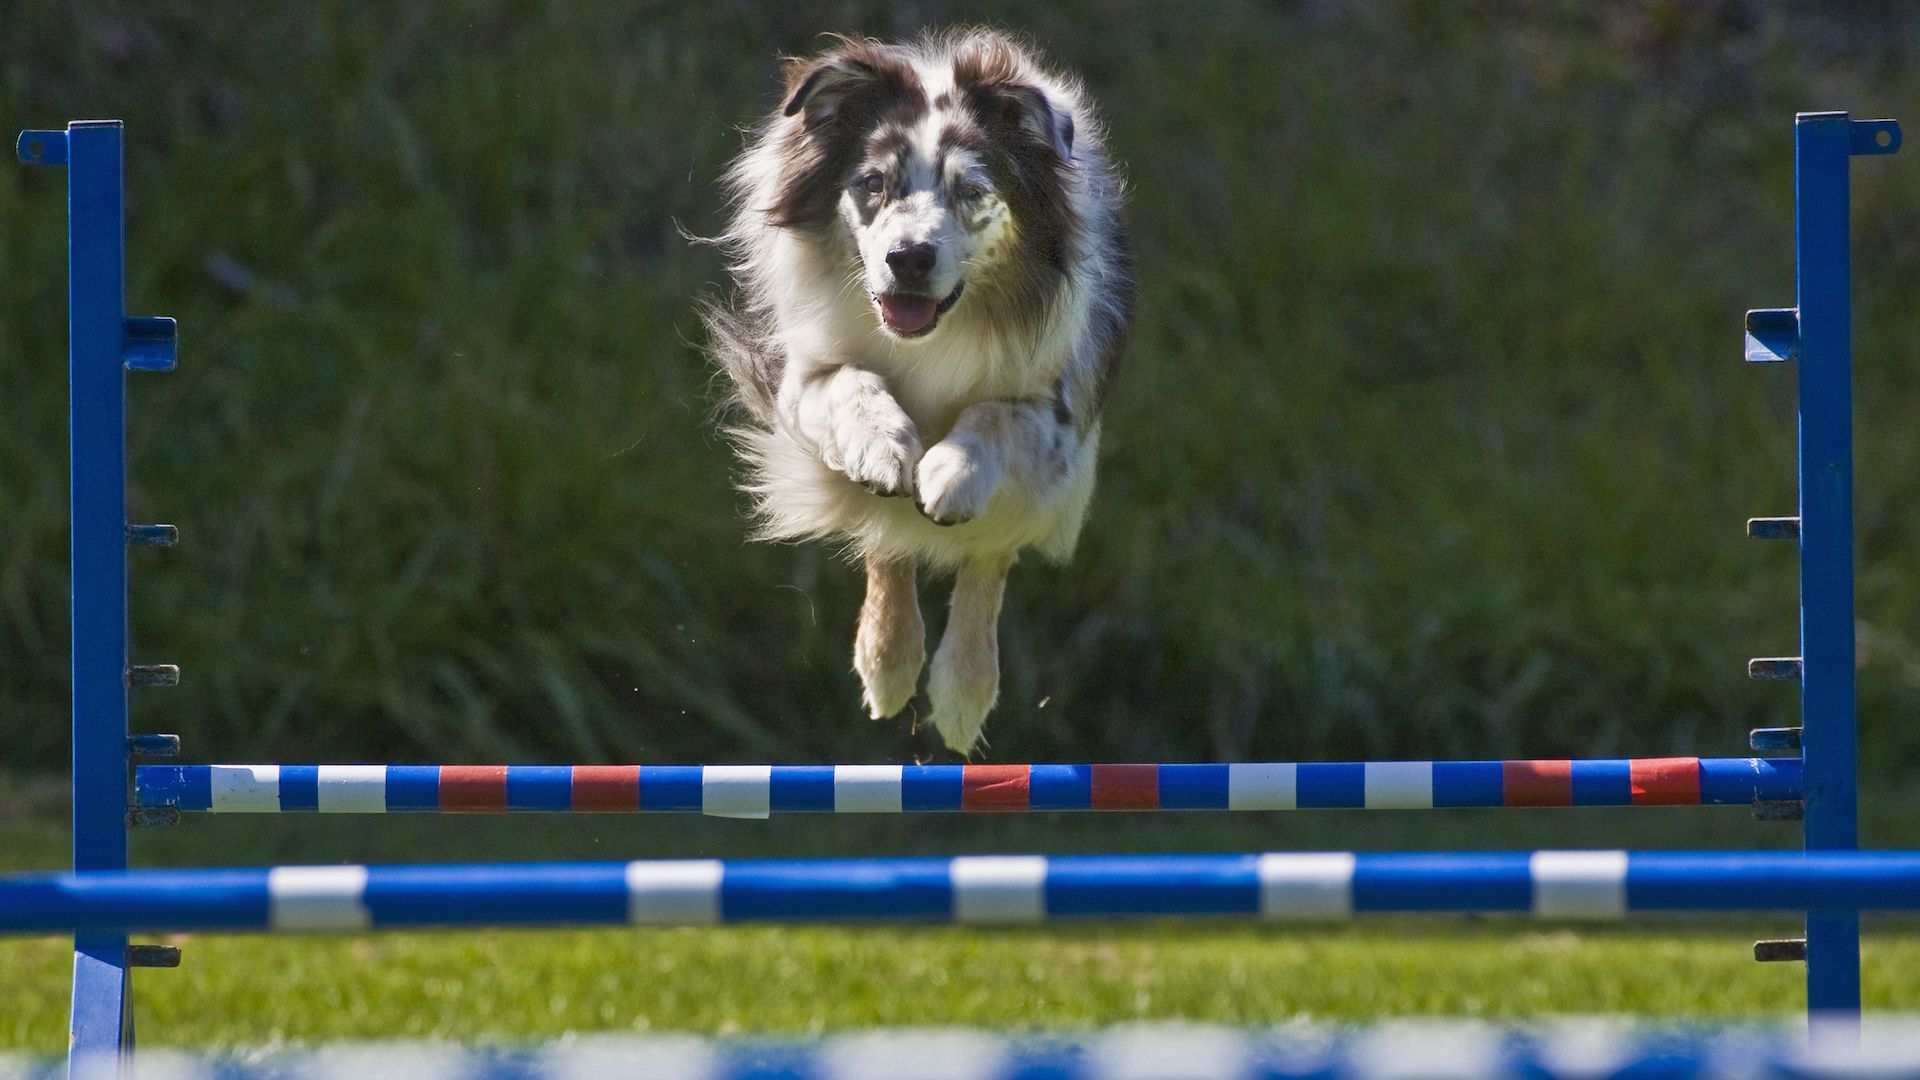 <p>                     Dogs love to show off their athletic ability and let off steam. And this can be channelled into sporting prowess. Dogs love flyball, agility, canic-cross, sled-pulling, and many other canine sports that allow them to show off their skills, including in front of an audience. Cats prefer to curl up by the fire.                    </p>